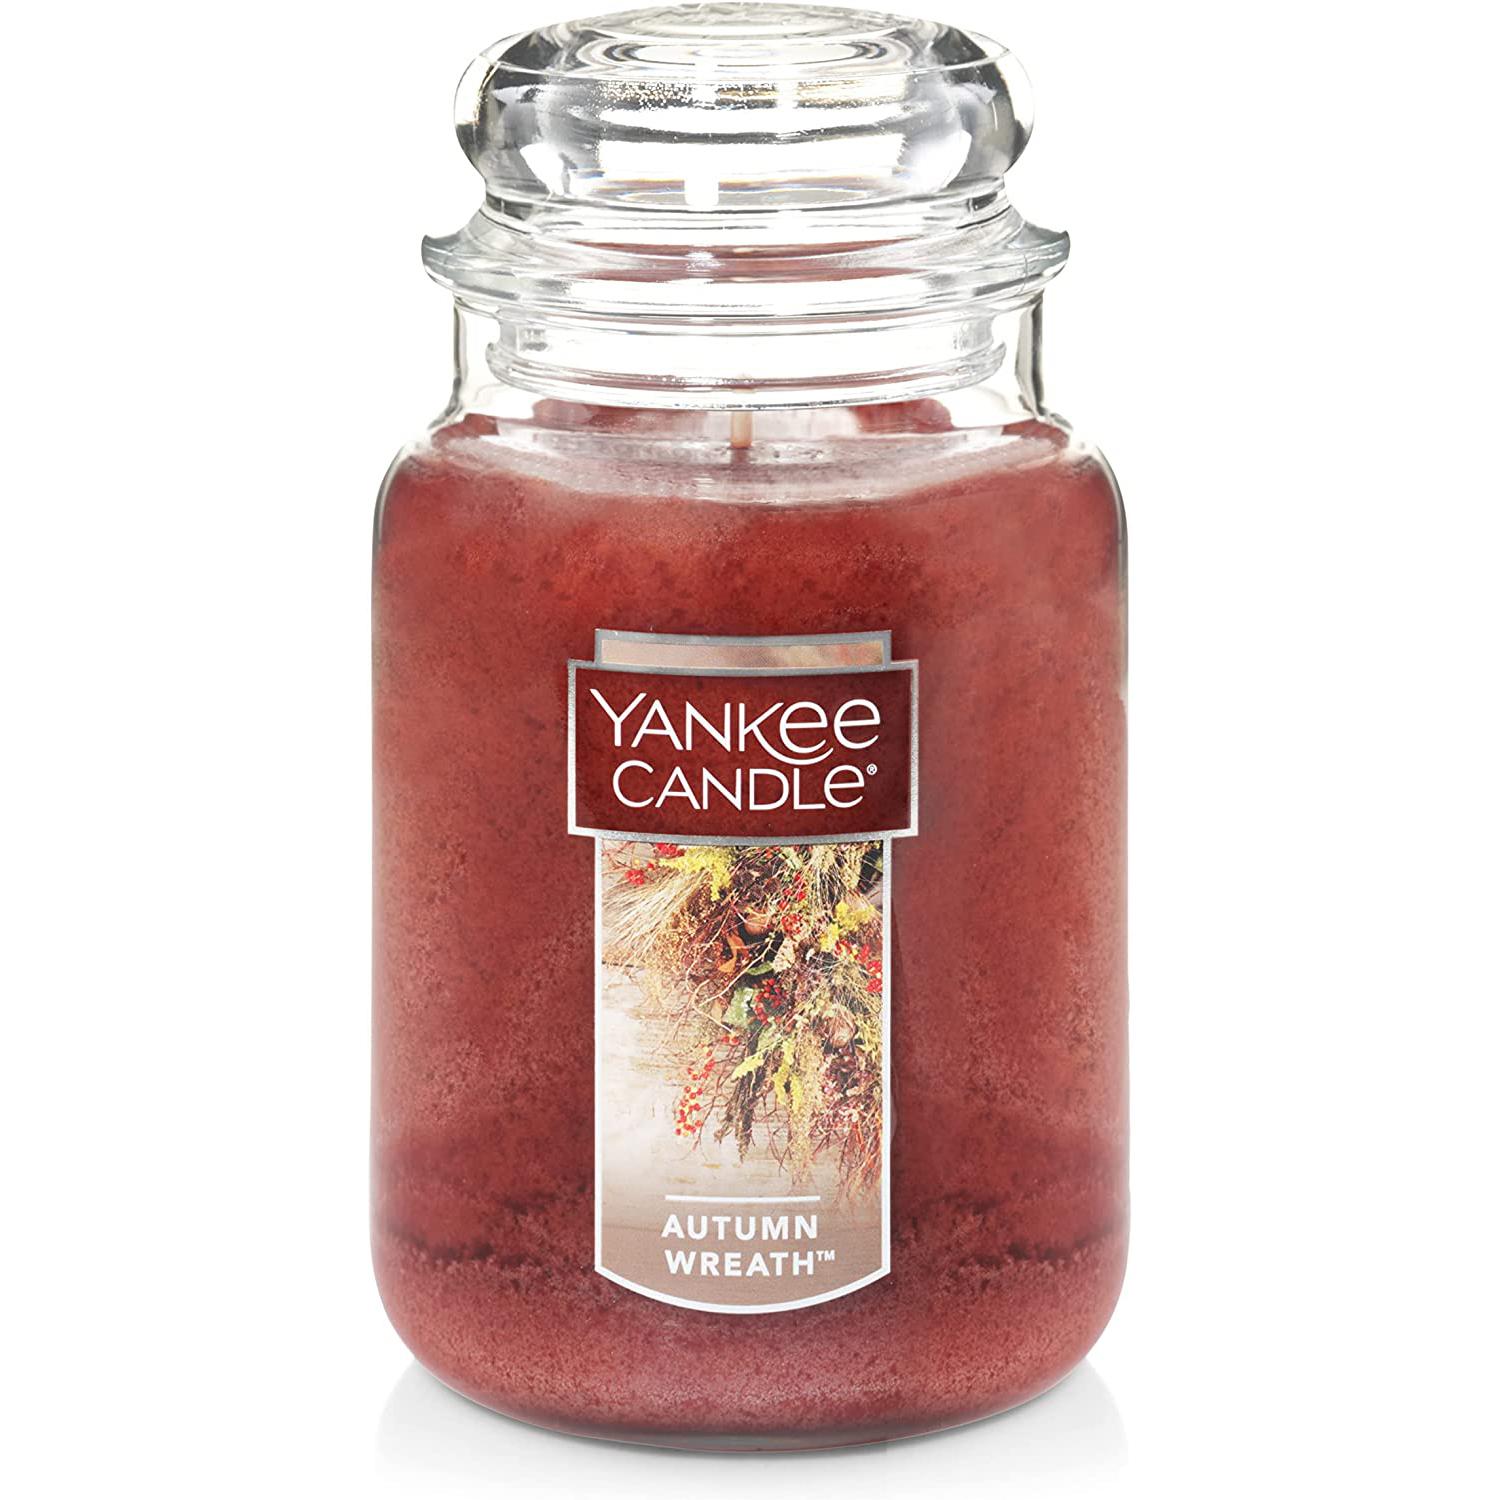 Yankee Candle Large Jar Candle Autumn Wreath Scented for $12.39 Shipped